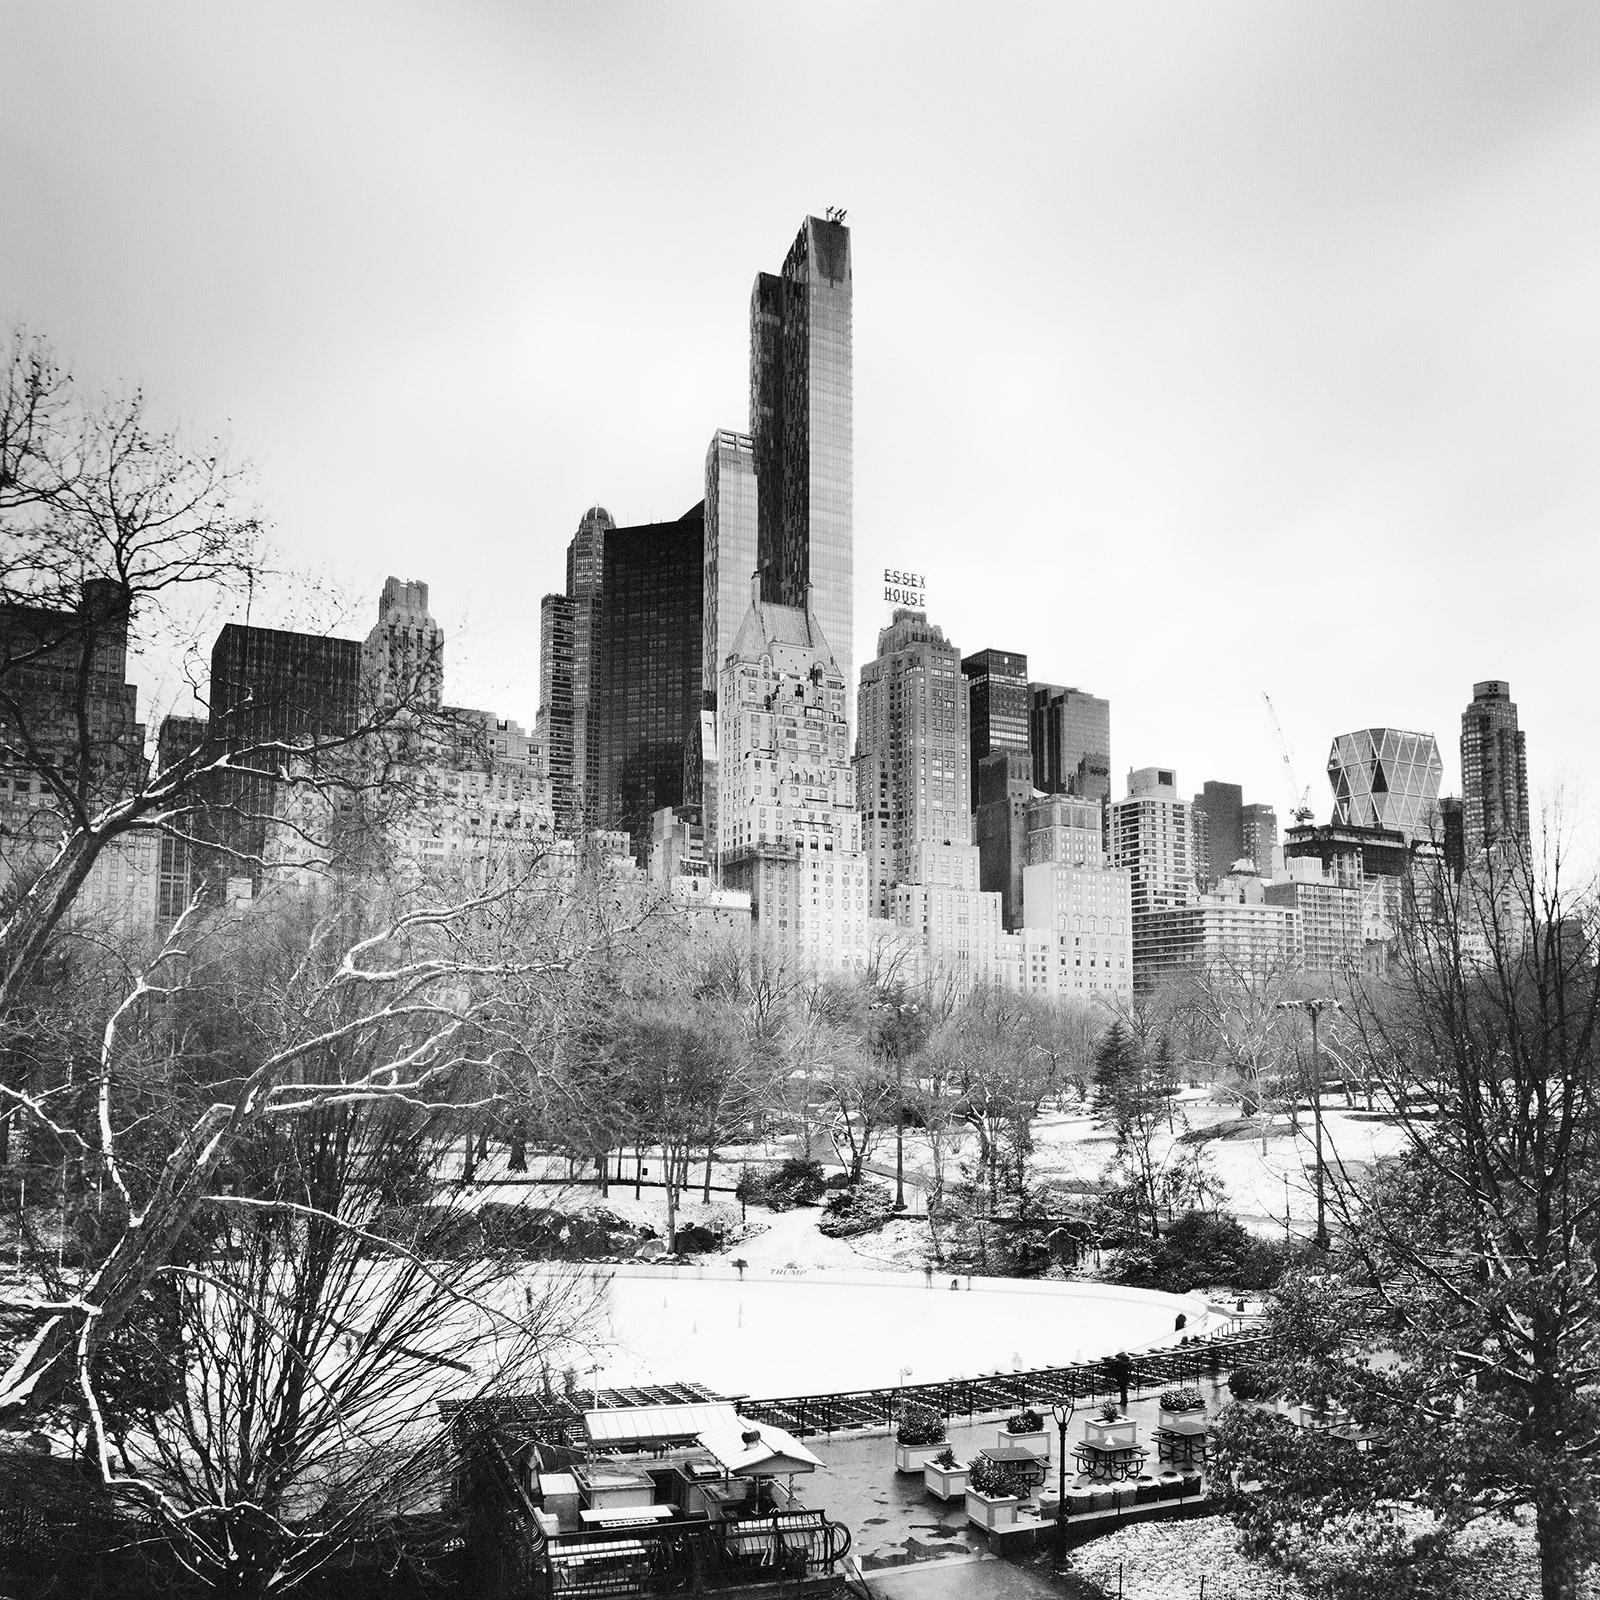 Gerald Berghammer Black and White Photograph - Essex House, Central Park, New York, USA, black and white photography, cityscape